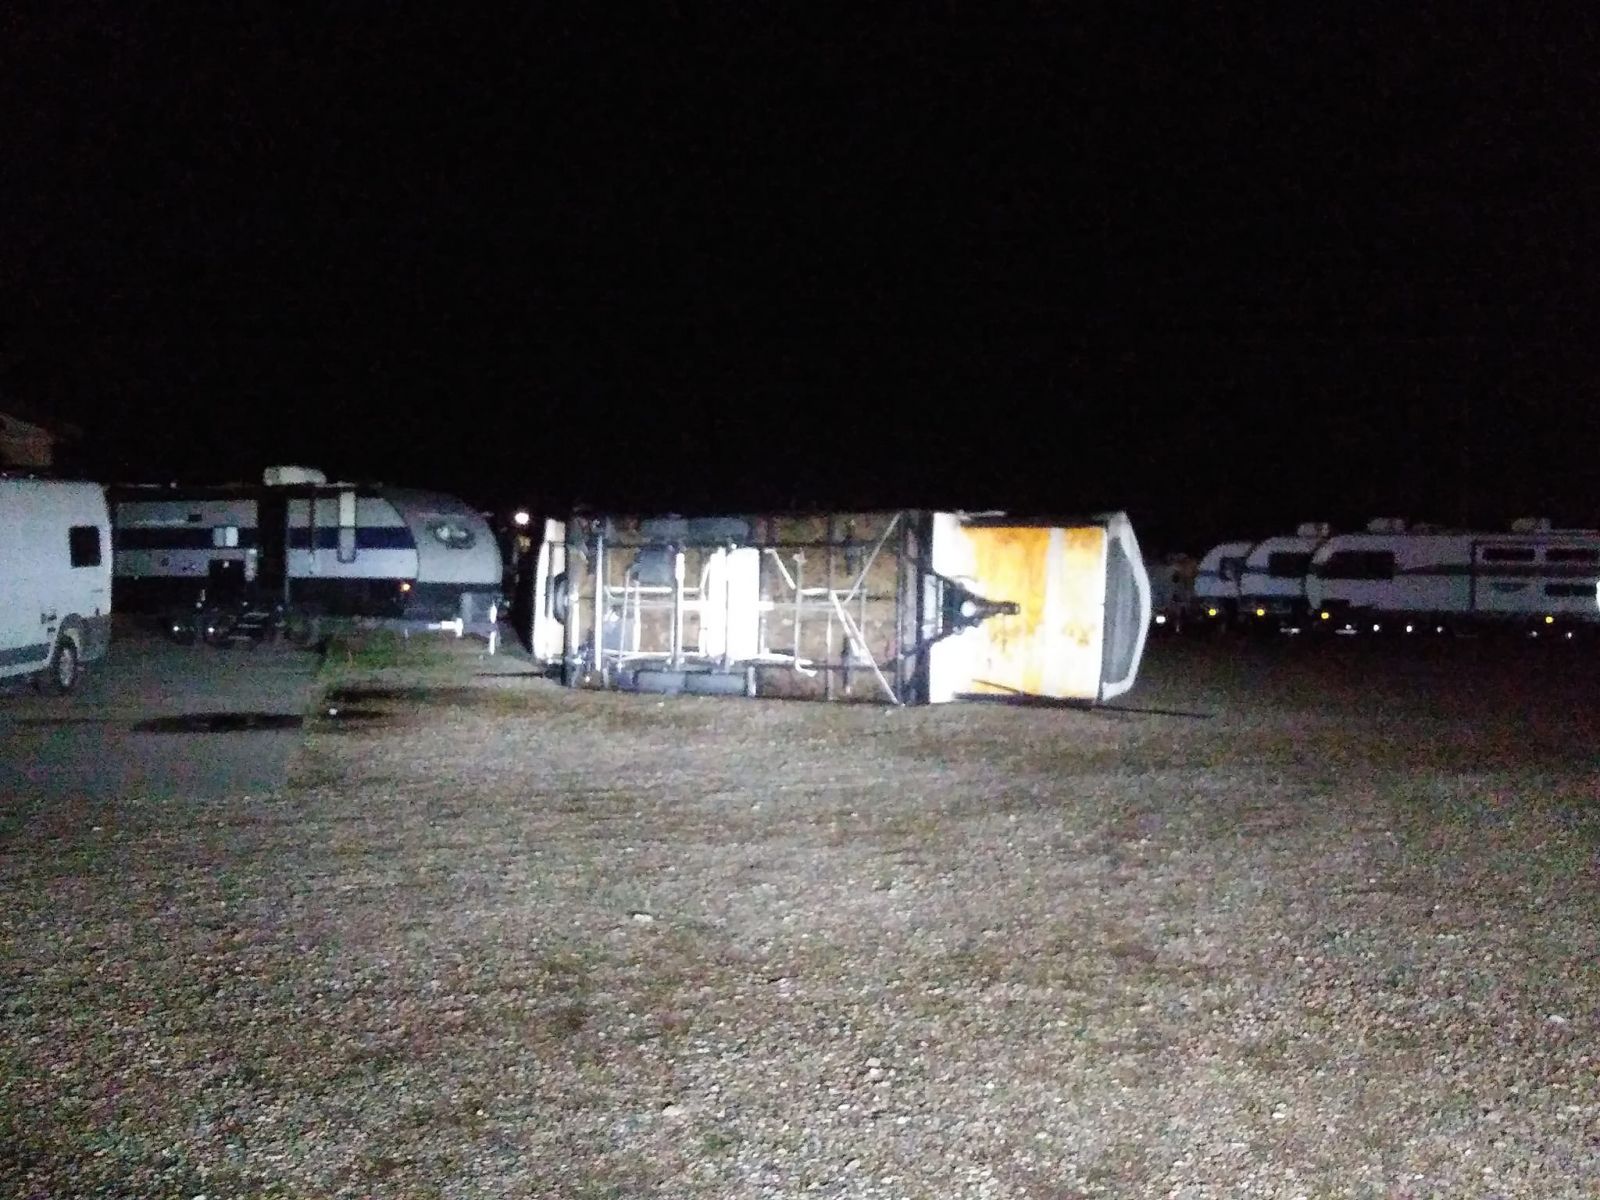 RV trailer tipped over. Photo credit KCCR Pierre.